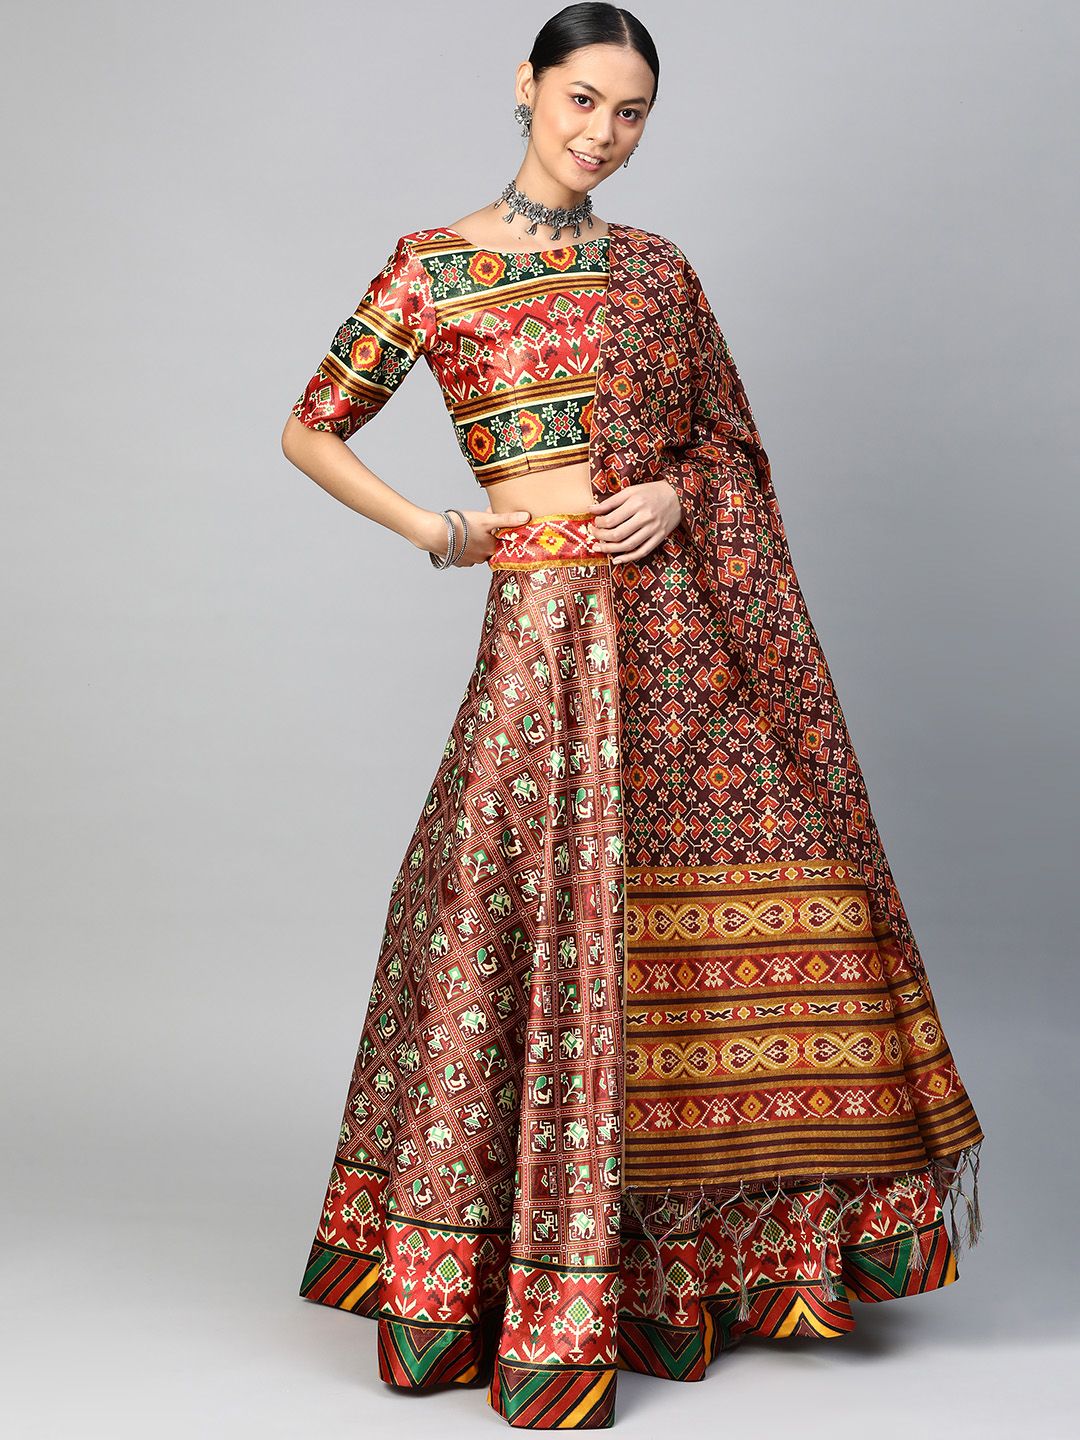 SHUBHVASTRA Multicoloured Printed Semi-Stitched Lehenga & Unstitched Blouse With Dupatta Price in India